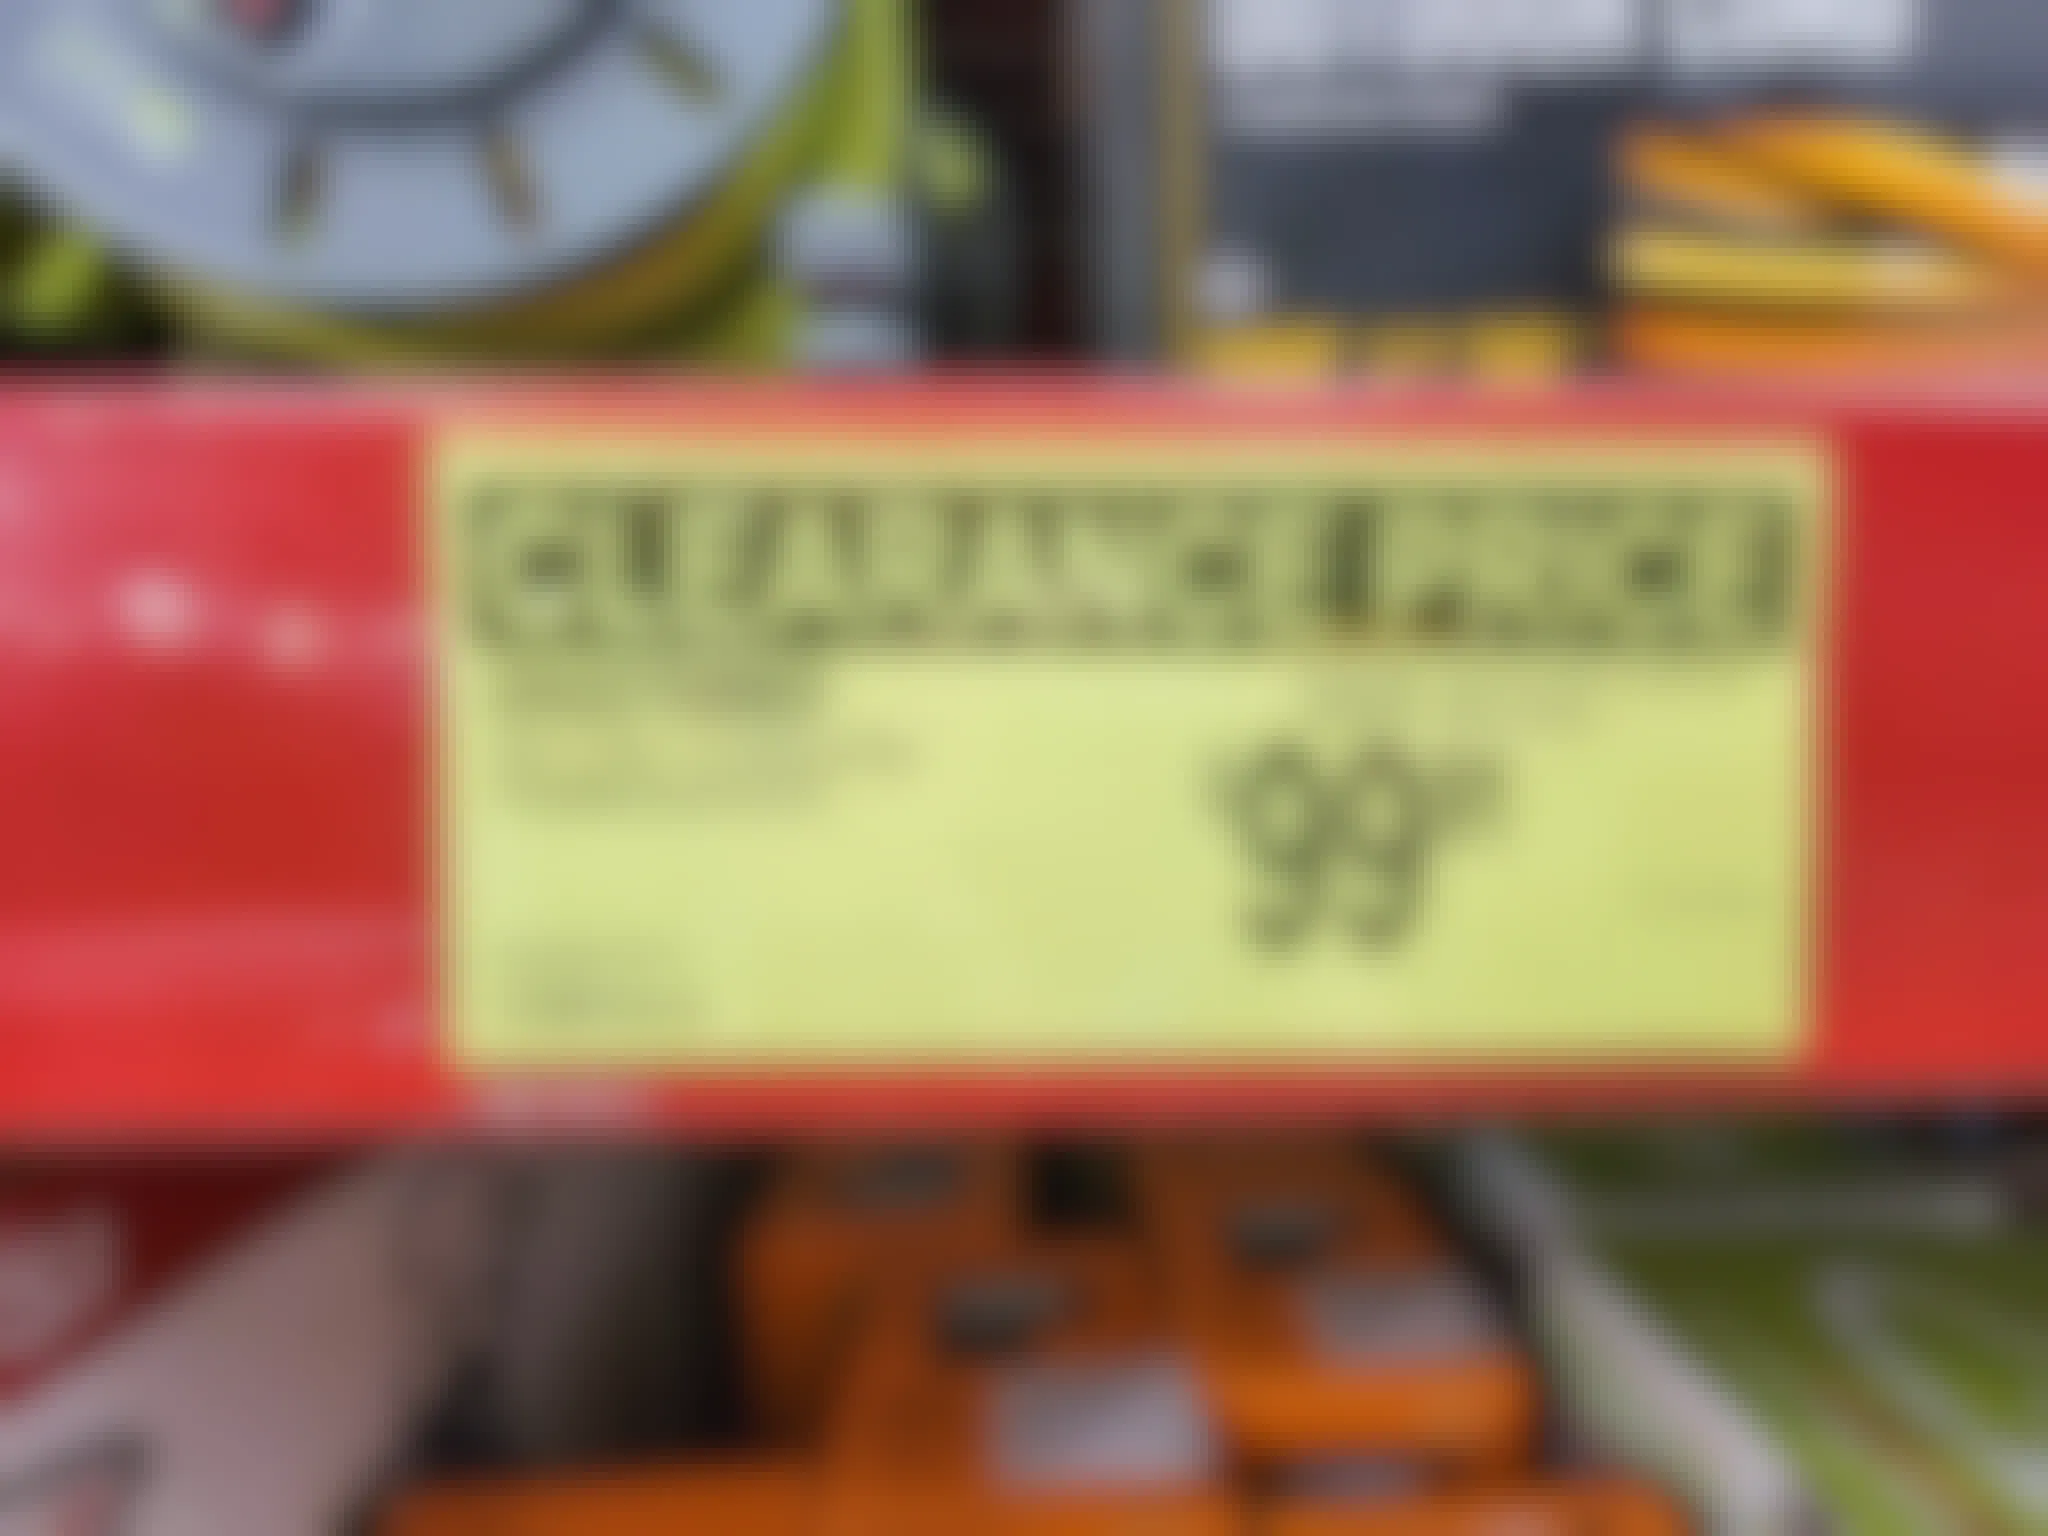 clearance sign for a worx weed eater for 99.91